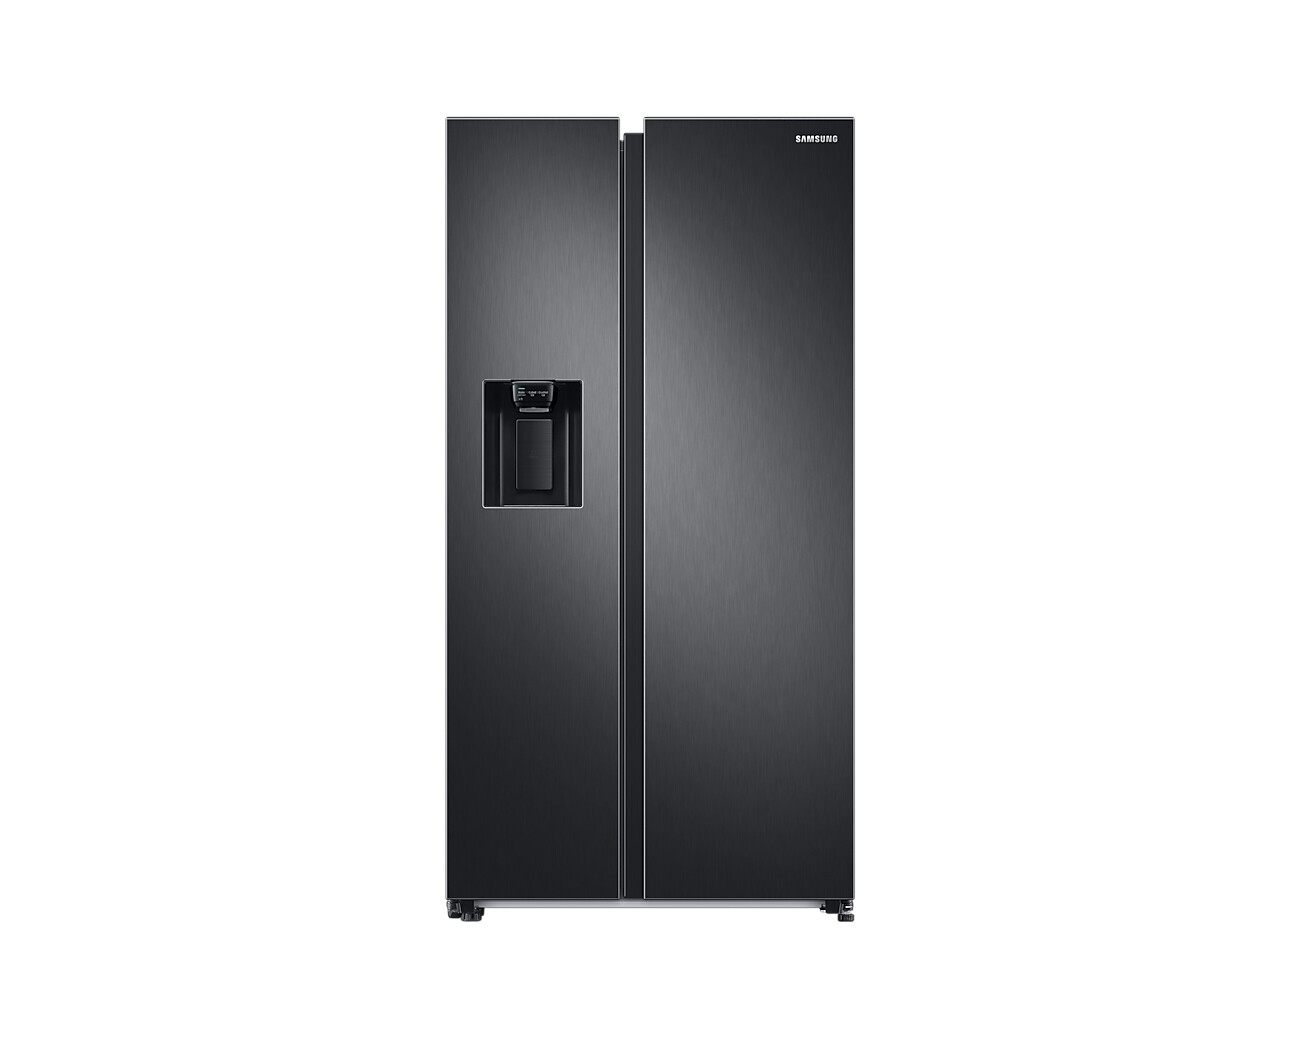 Samsung Series 8 RS68A884CB1 Plumbed Frost Free American Fridge Freezer – Black – C Rated #361954